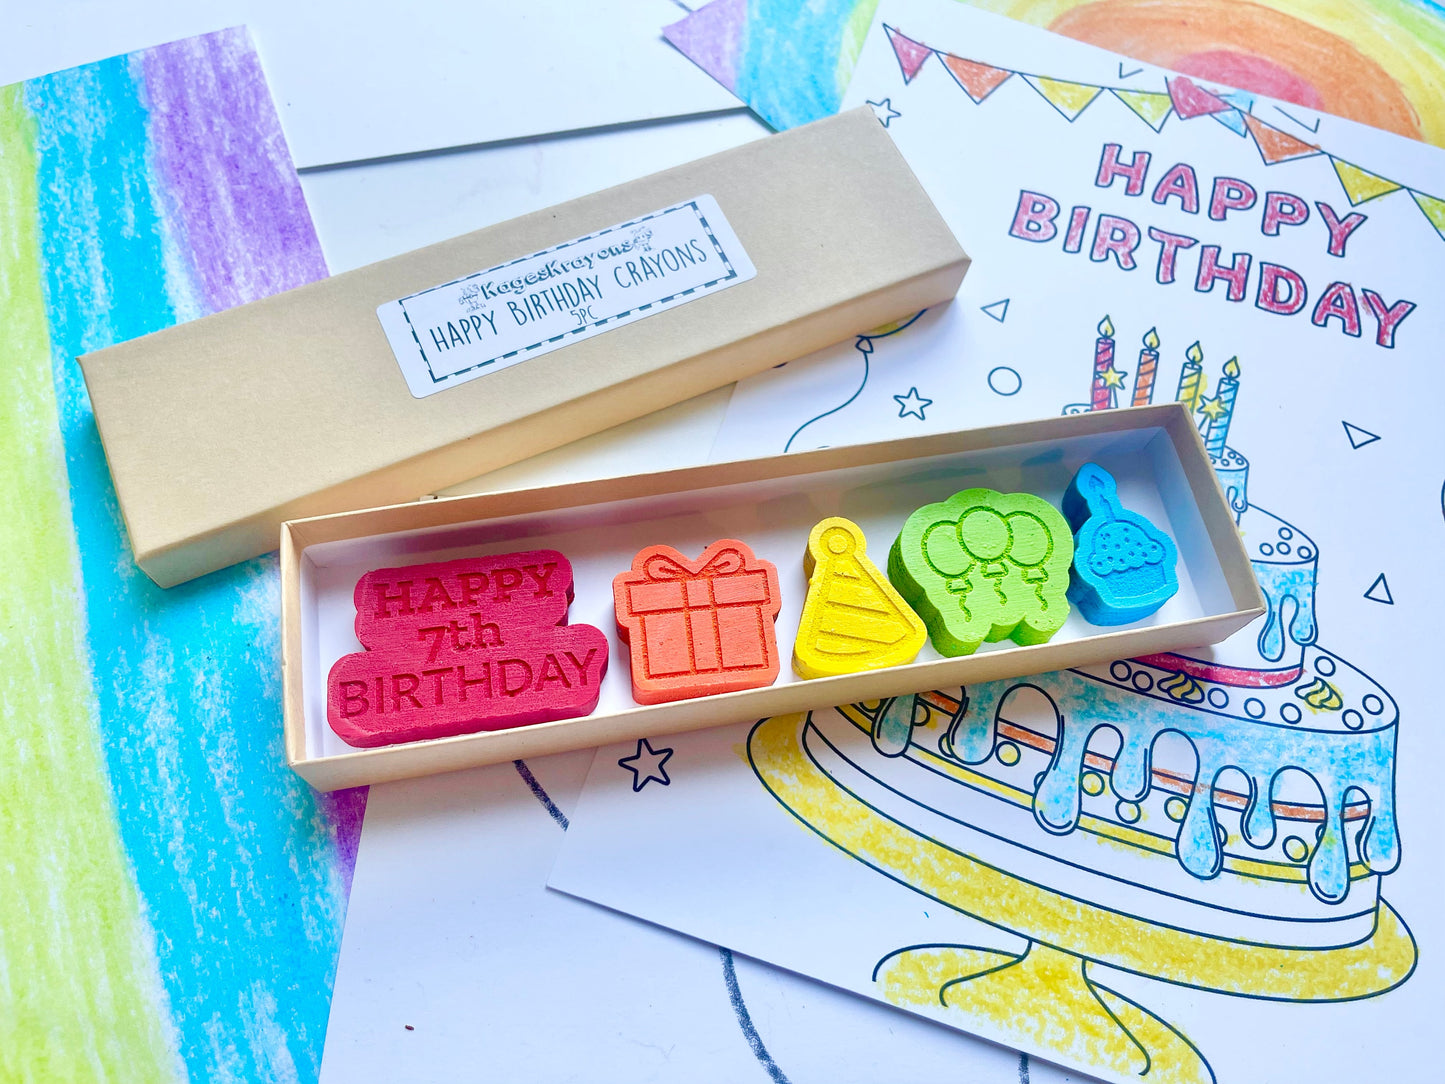 7th Birthday Crayons - 7th Birthday Gifts - Kids Happy Birthday Gifts - Kids Birthday Presents - Gifts For Kids - 7th Birthday Party Favors